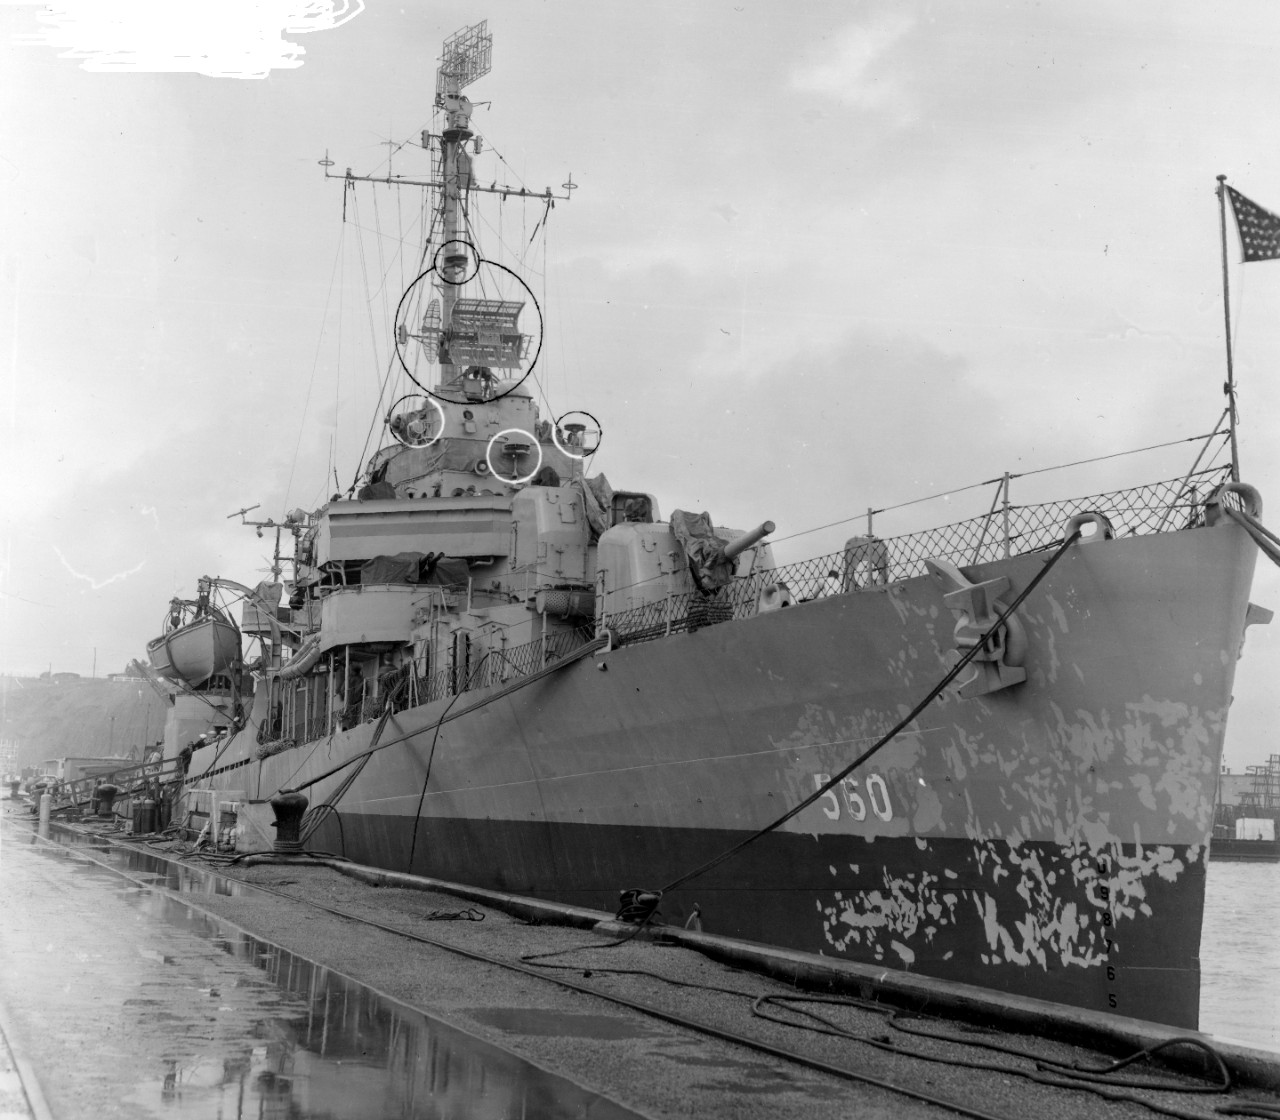 Morrison, Hunters Point, 1 February 1945, the circles on the photograph correspond to alterations carried out during the recent overhaul. Her camouflage pattern has been changed to a two-toned scheme, with the line of demarcation following the horizon instead of the sheer of the decks. (U.S. Navy Bureau of Ships Photograph, National Archives and Records Administration, Still Pictures Division, College Park, Md.)